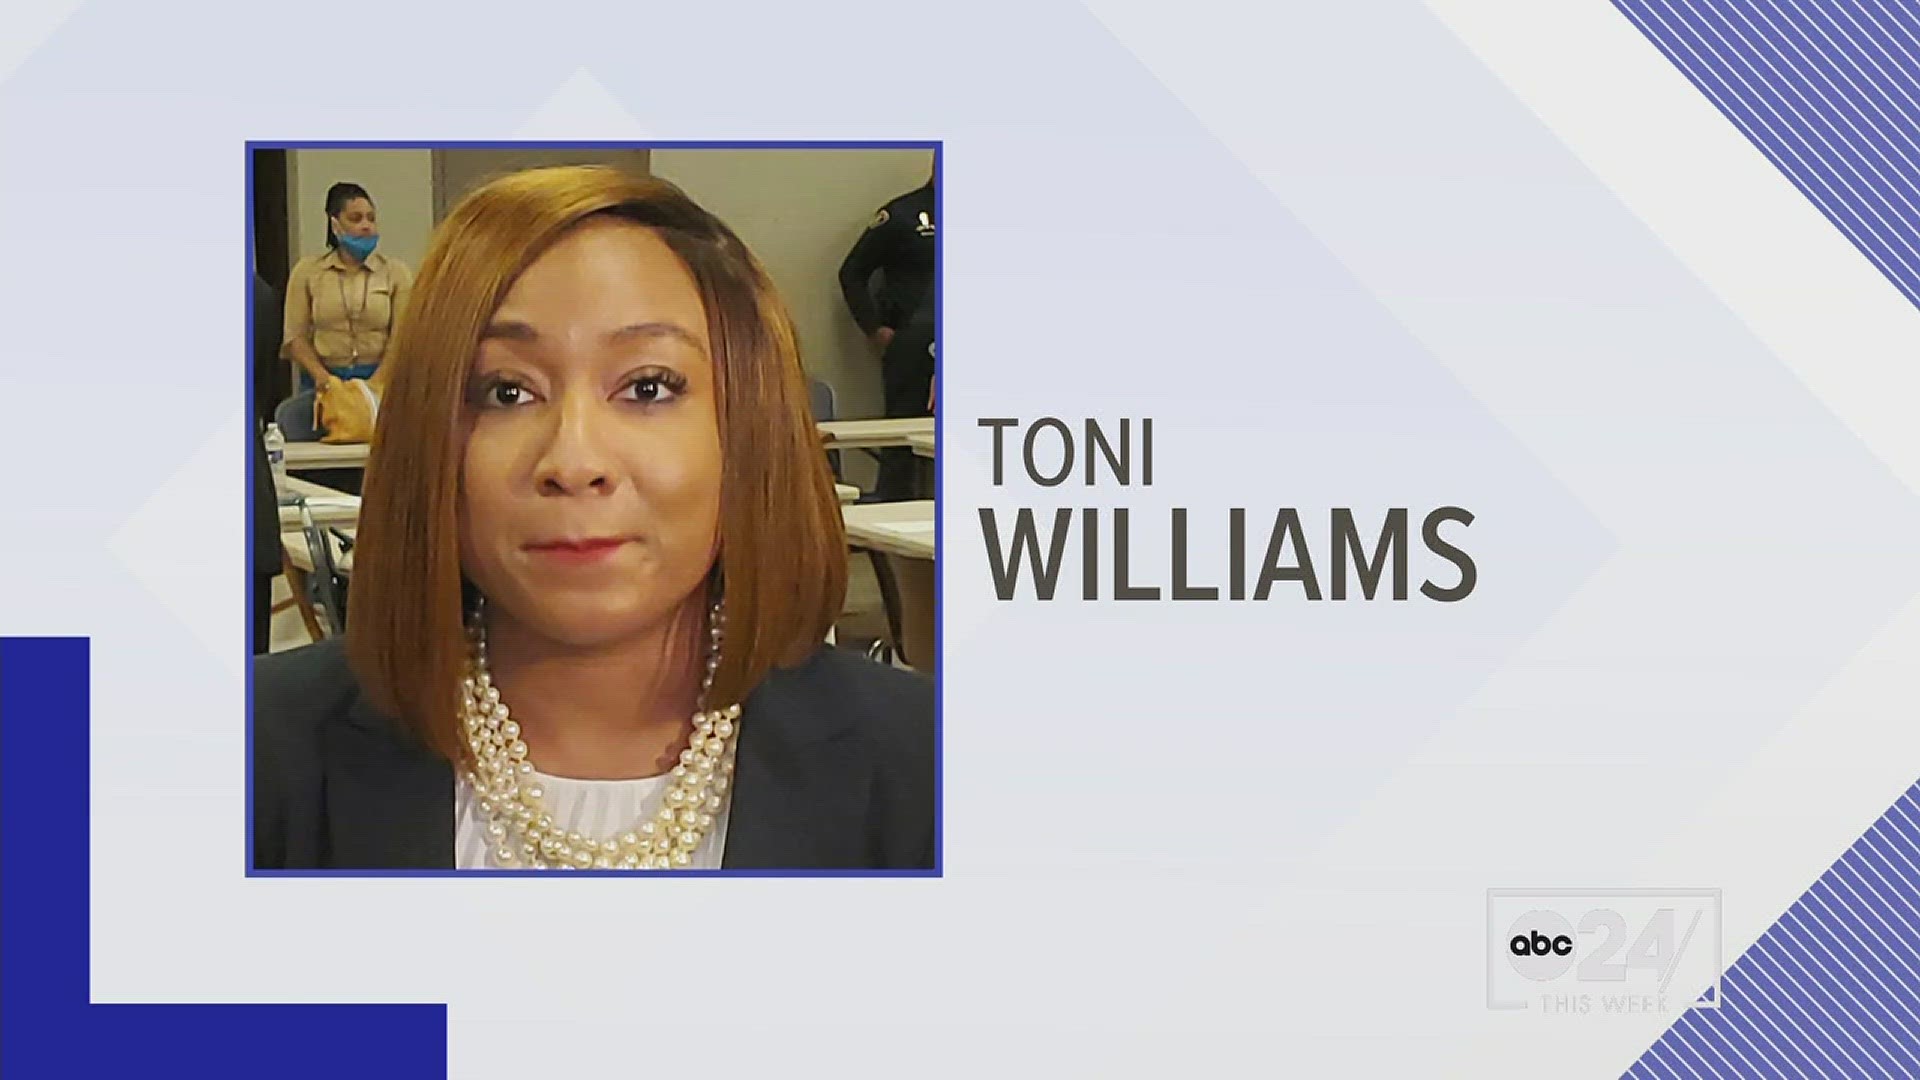 Interim superintendent Toni Williams should be allowed to "throw her hat in the ring," Pepper Baker says, but the process of fielding candidates "should continue."